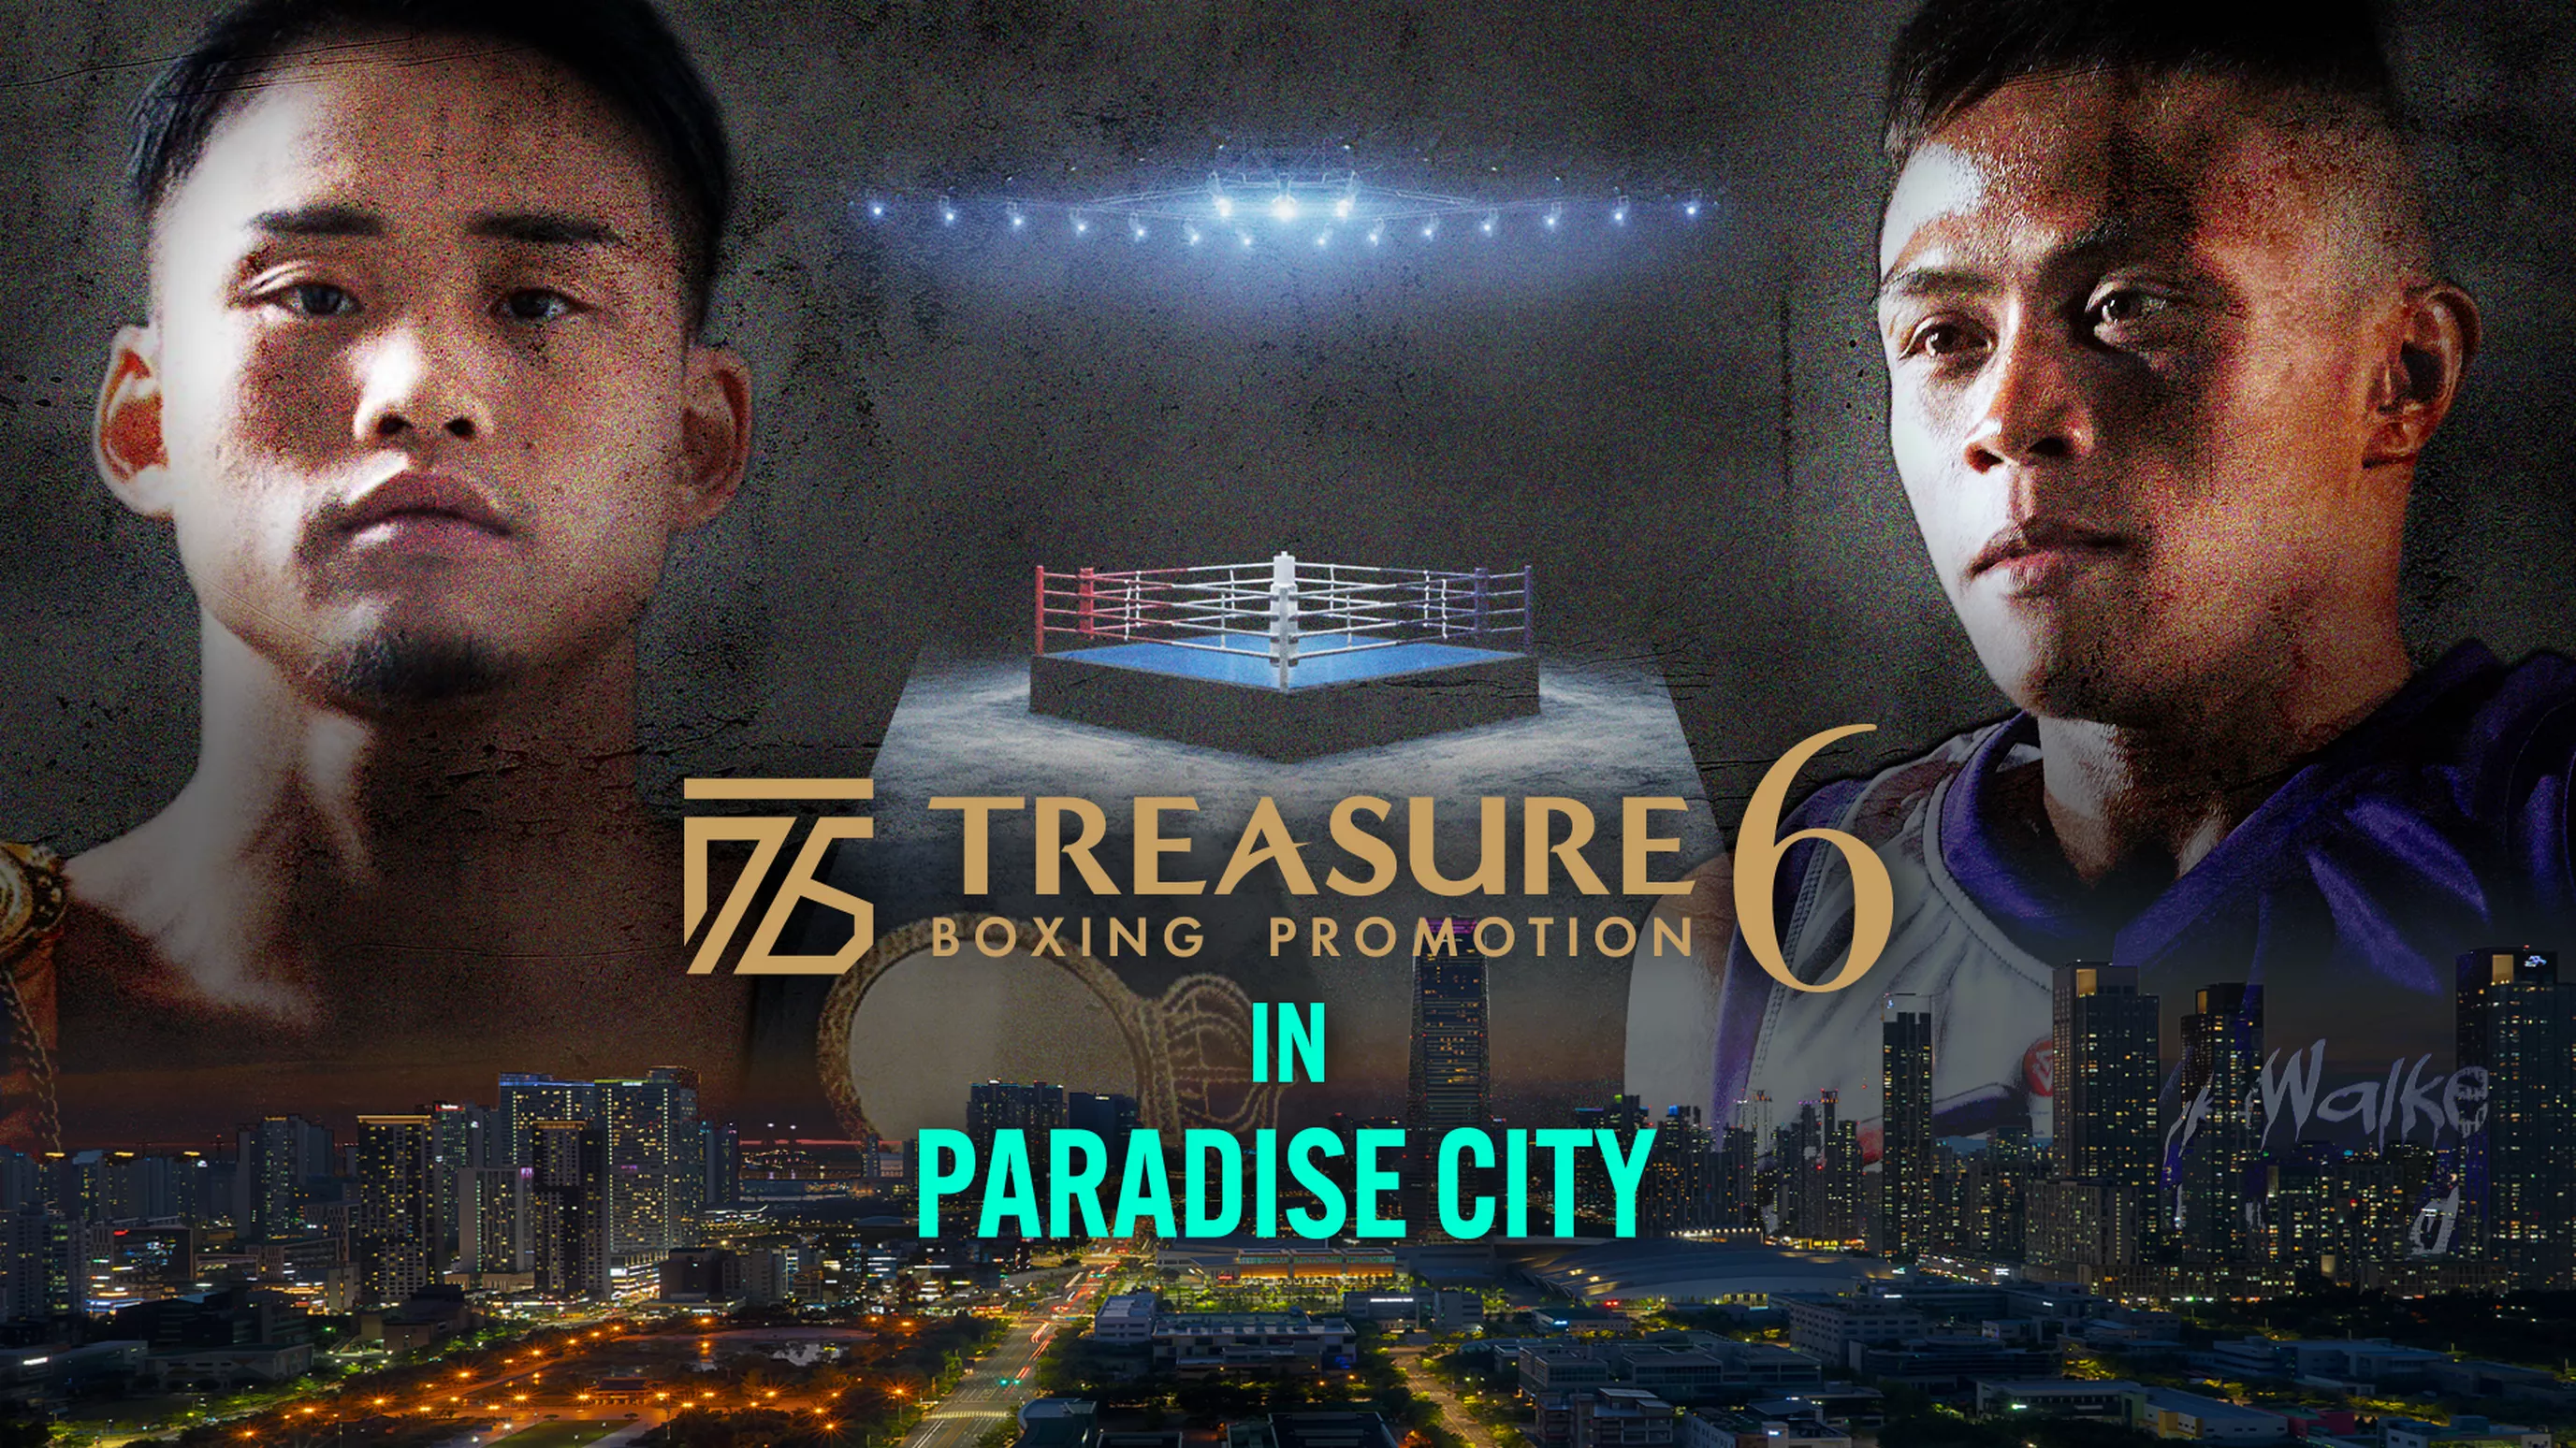 TREASURE BOXING PROMOTION 6 in PARADISE CITY